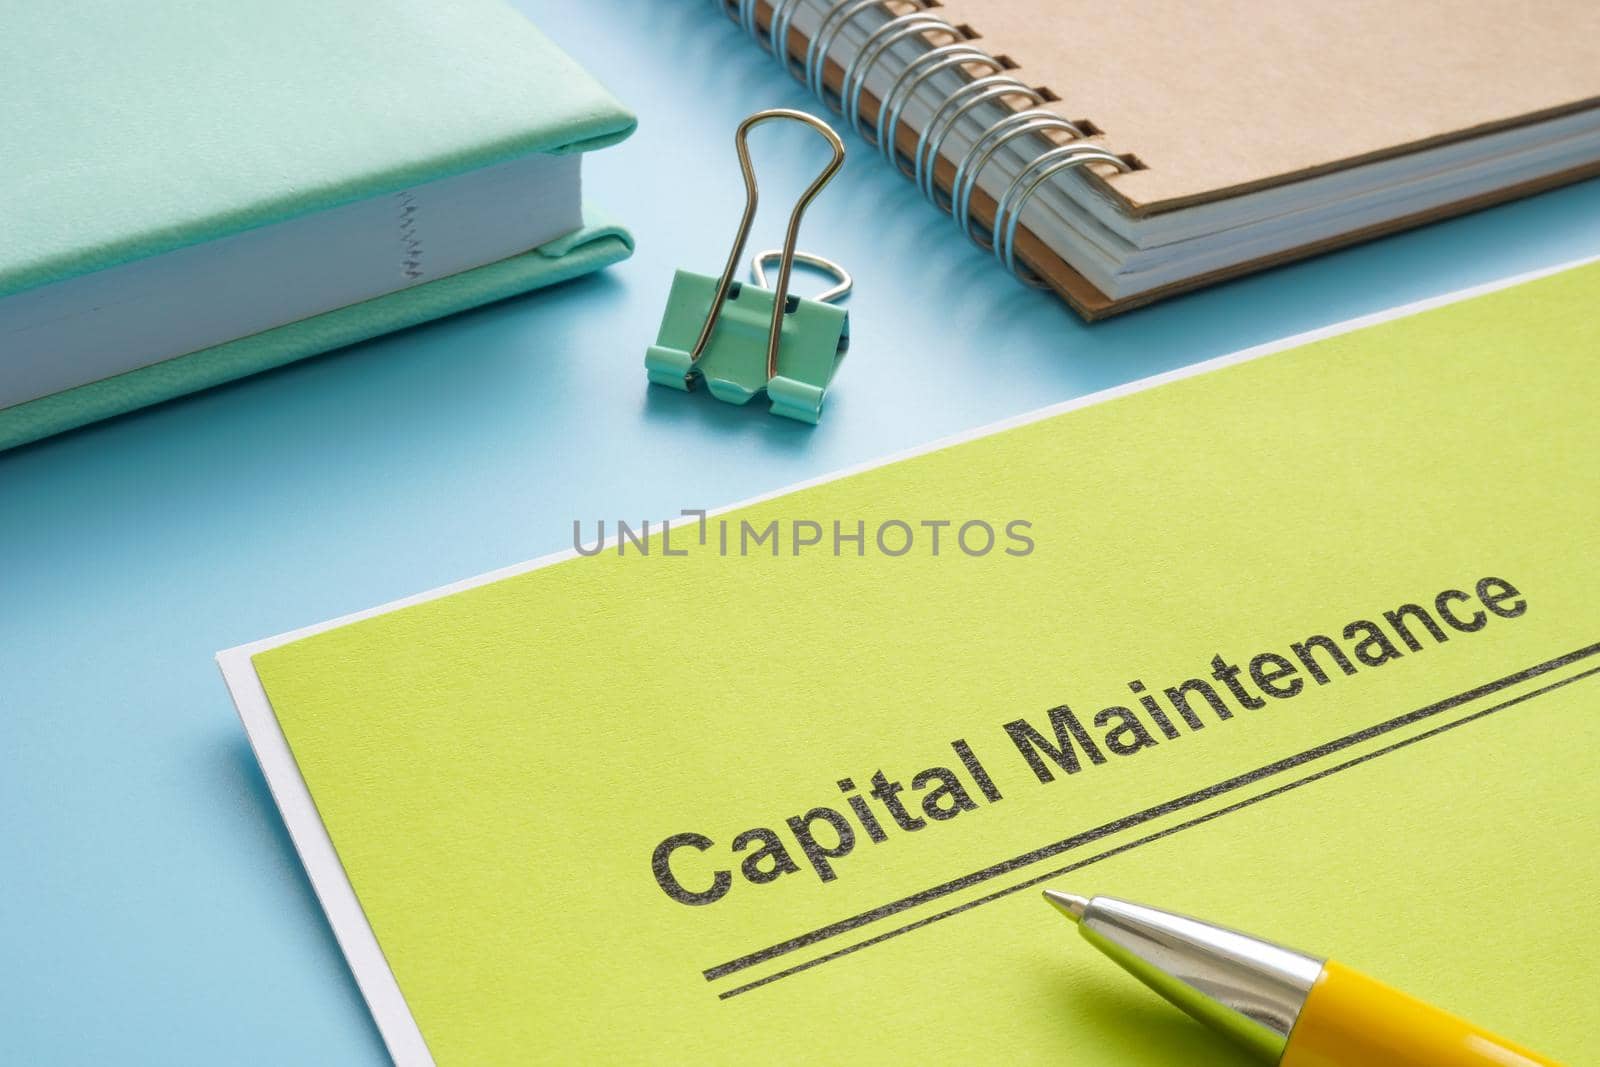 Papers about capital maintenance near the notebook.